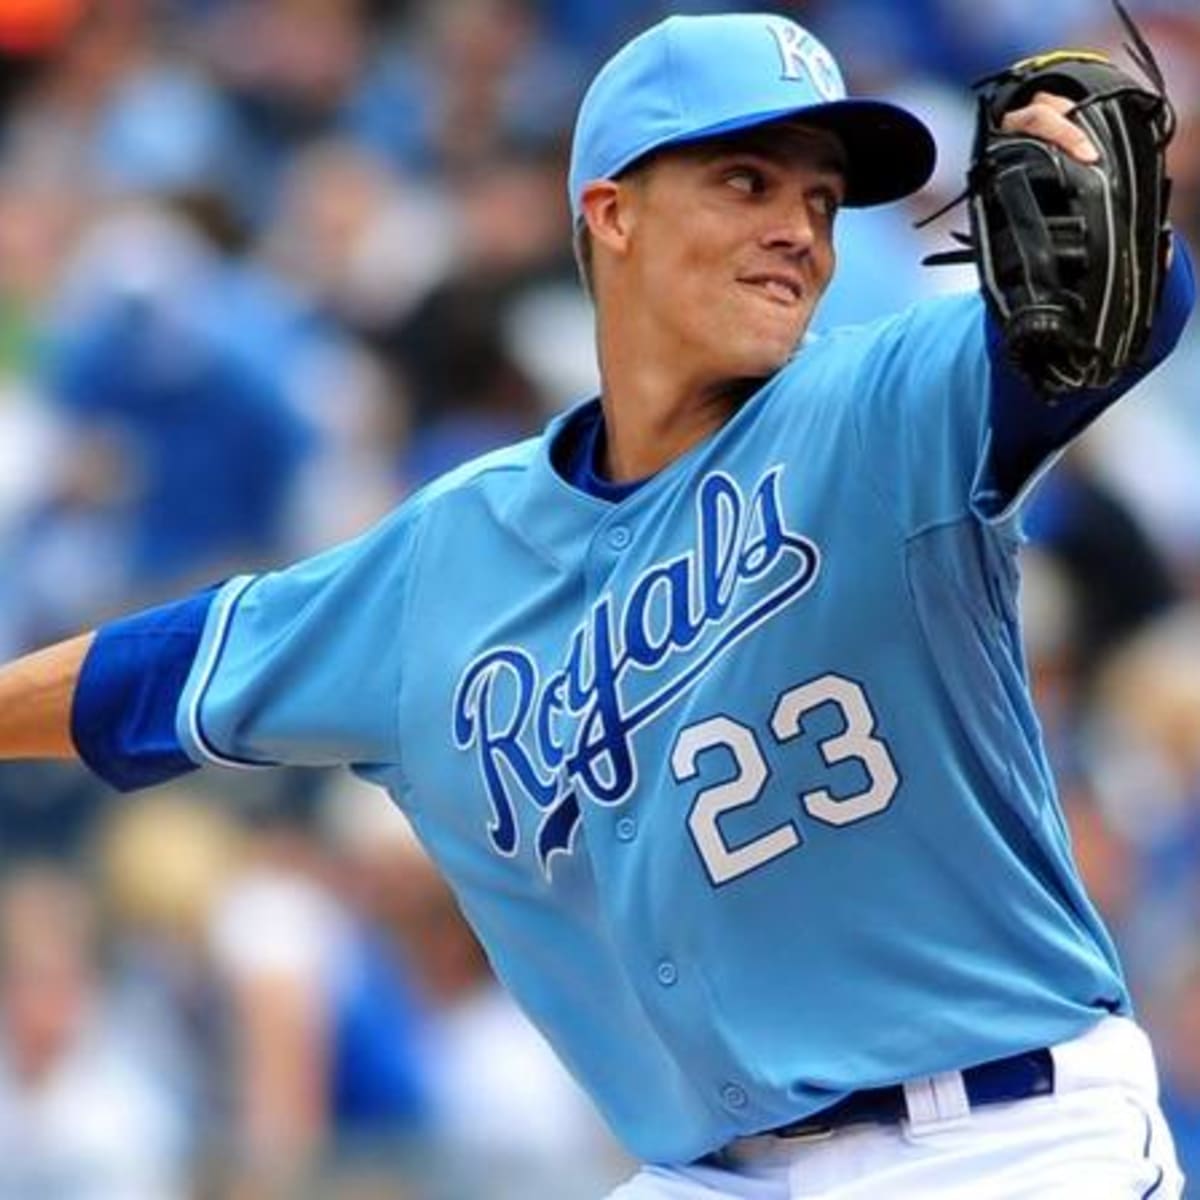 Zack Greinke to make second Opening Day start for Royals 12 years